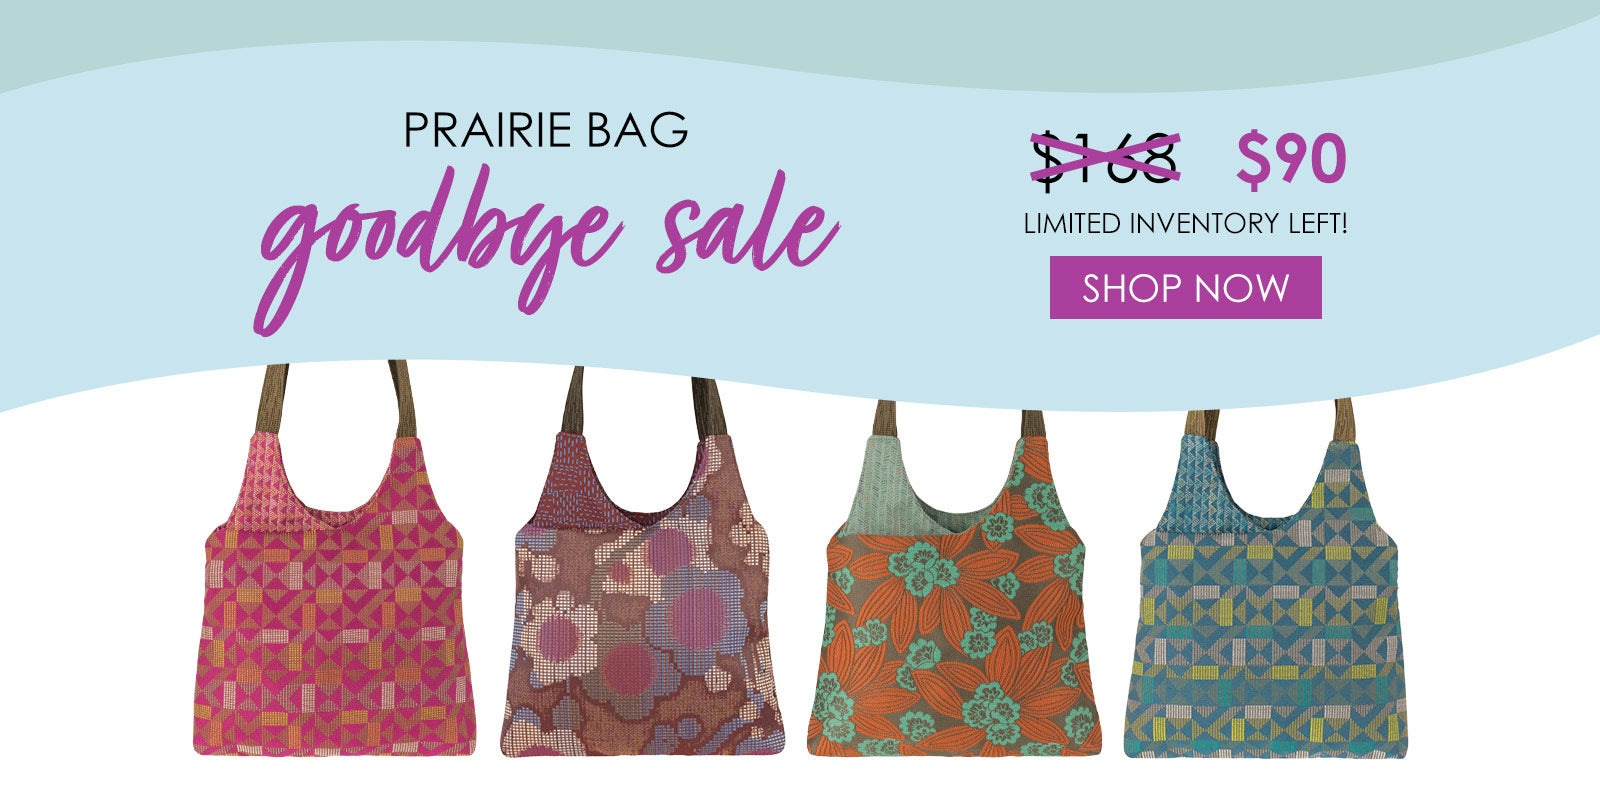 Prairie Bag Goodbye Sale. Act Fast - Limited Inventory Left!